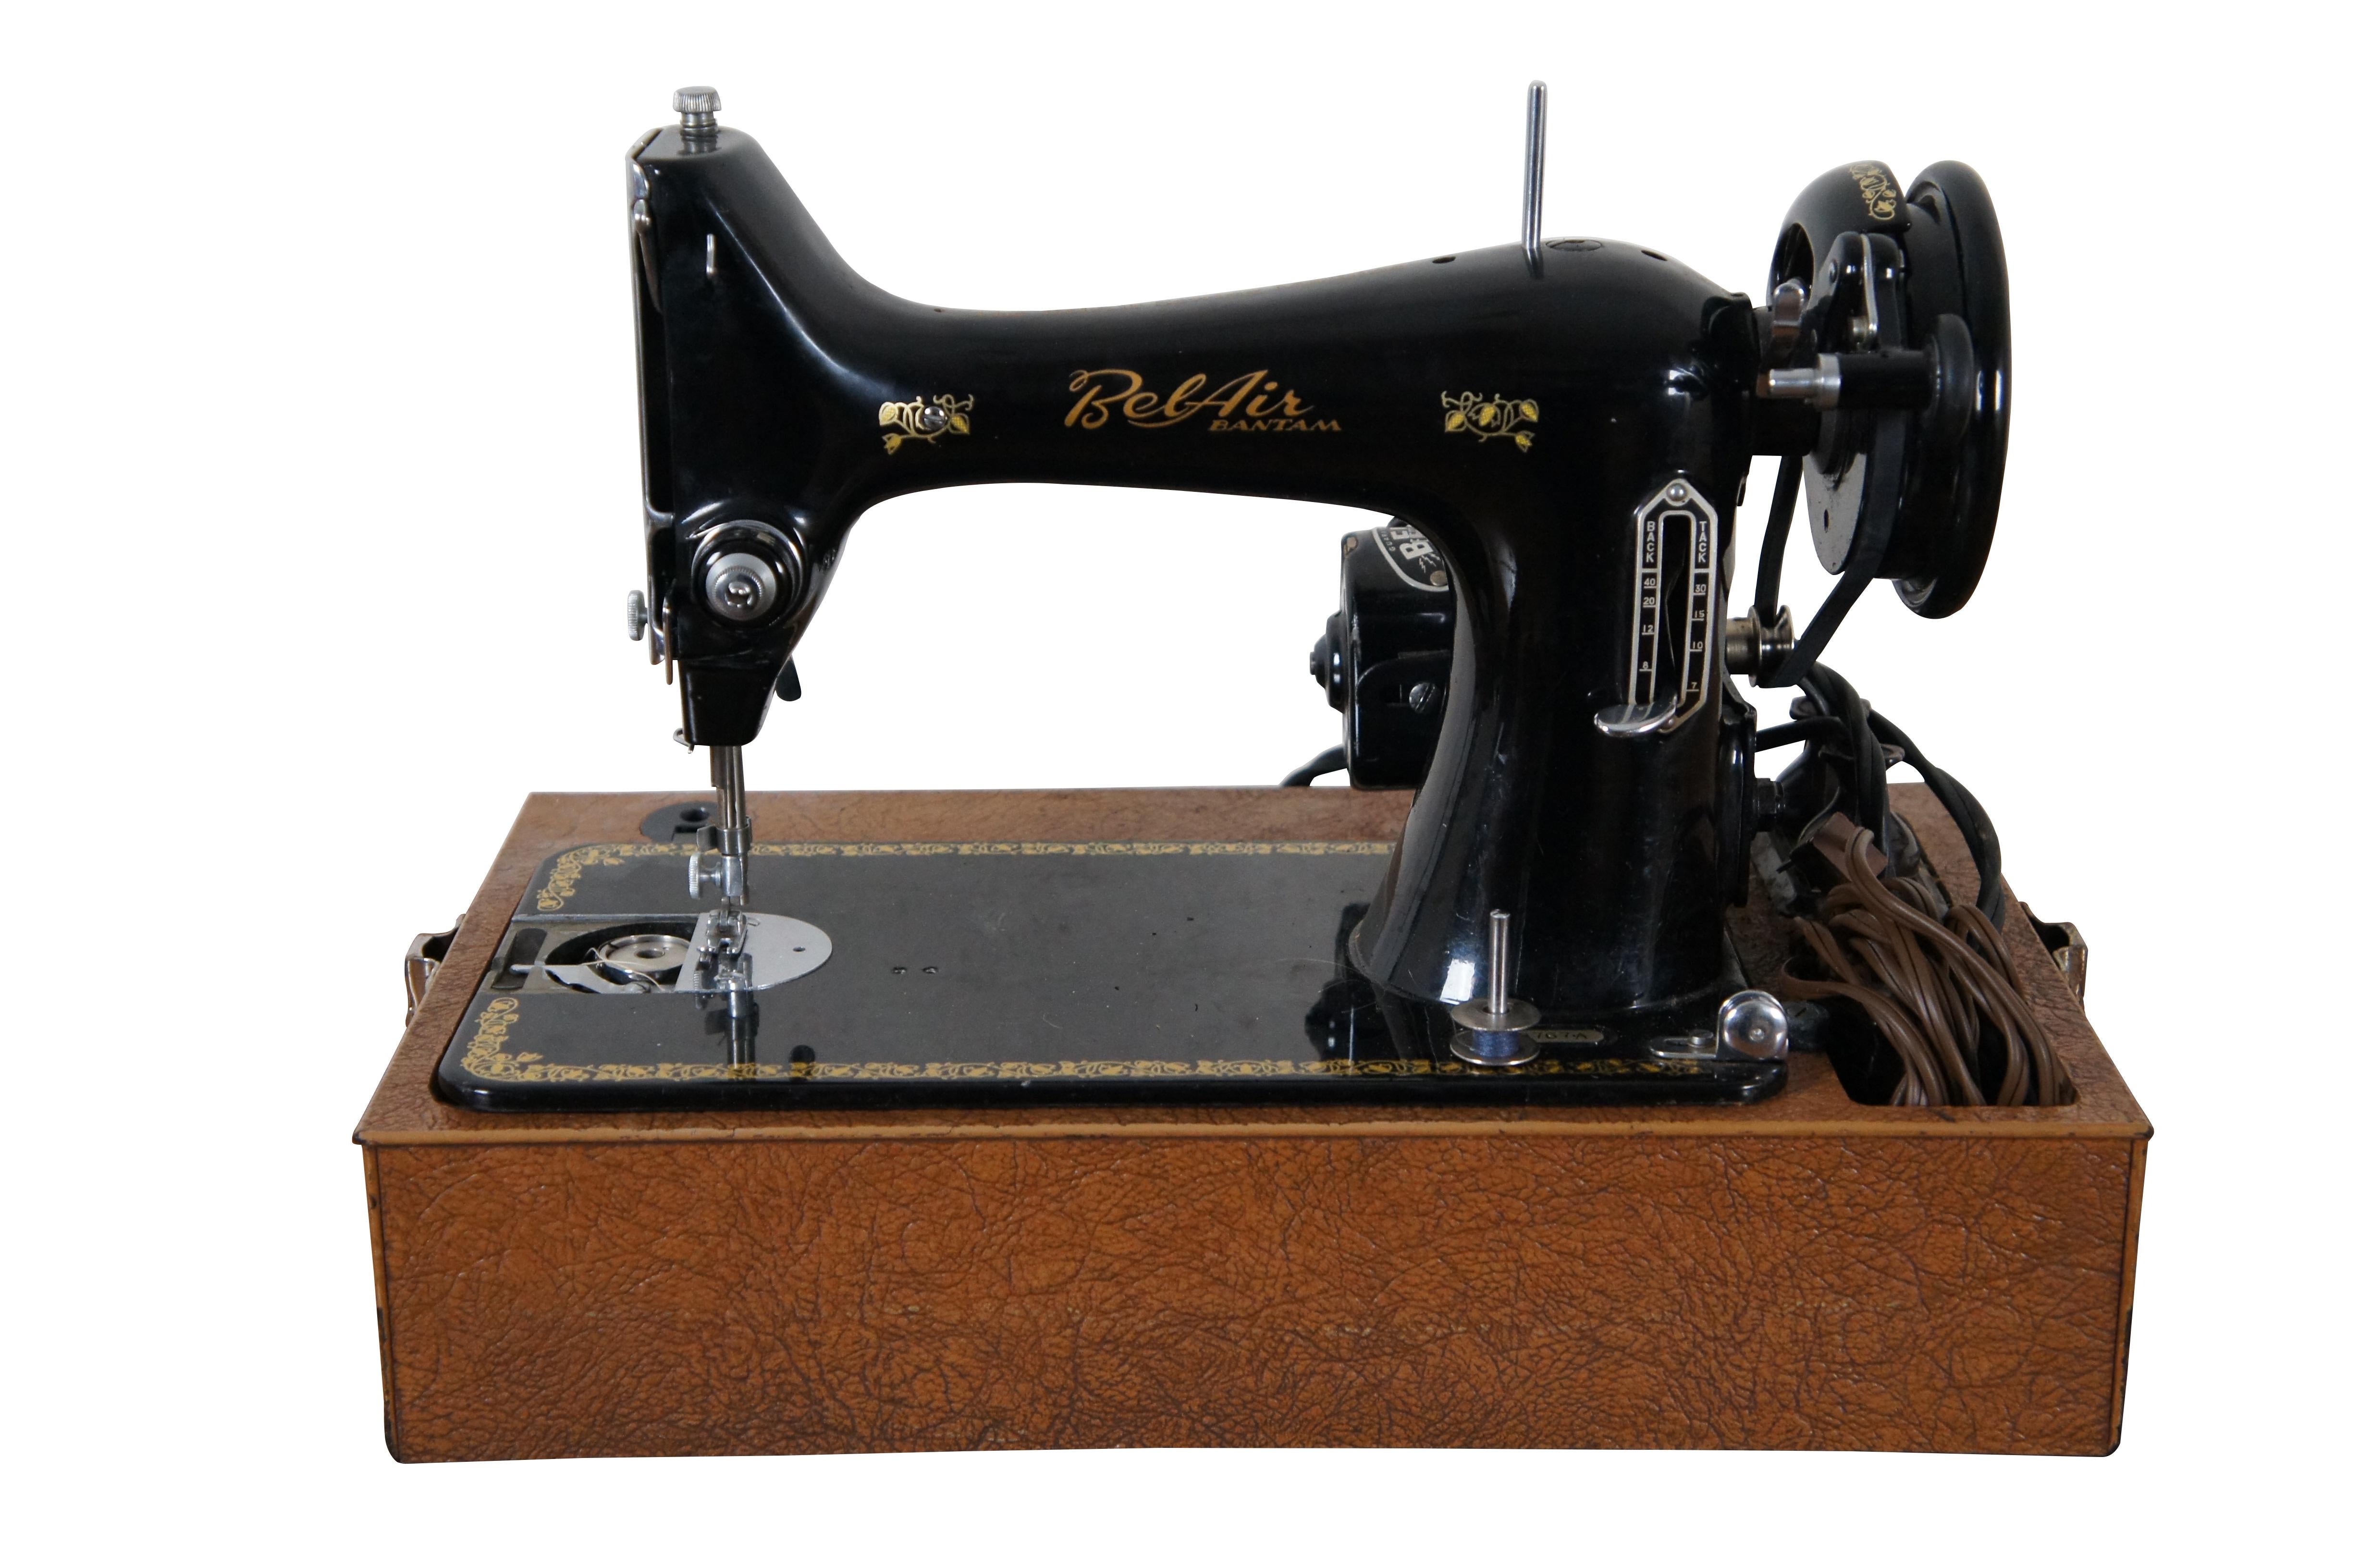 Mid century Bel-Air Bantam electric sewing machine and case. Black metal body with gold painted accents. Made in Japan. Serial number B509767A. Features Bell Electric Universal Motor, power cords, foot pedal, and box containing six assorted Singer